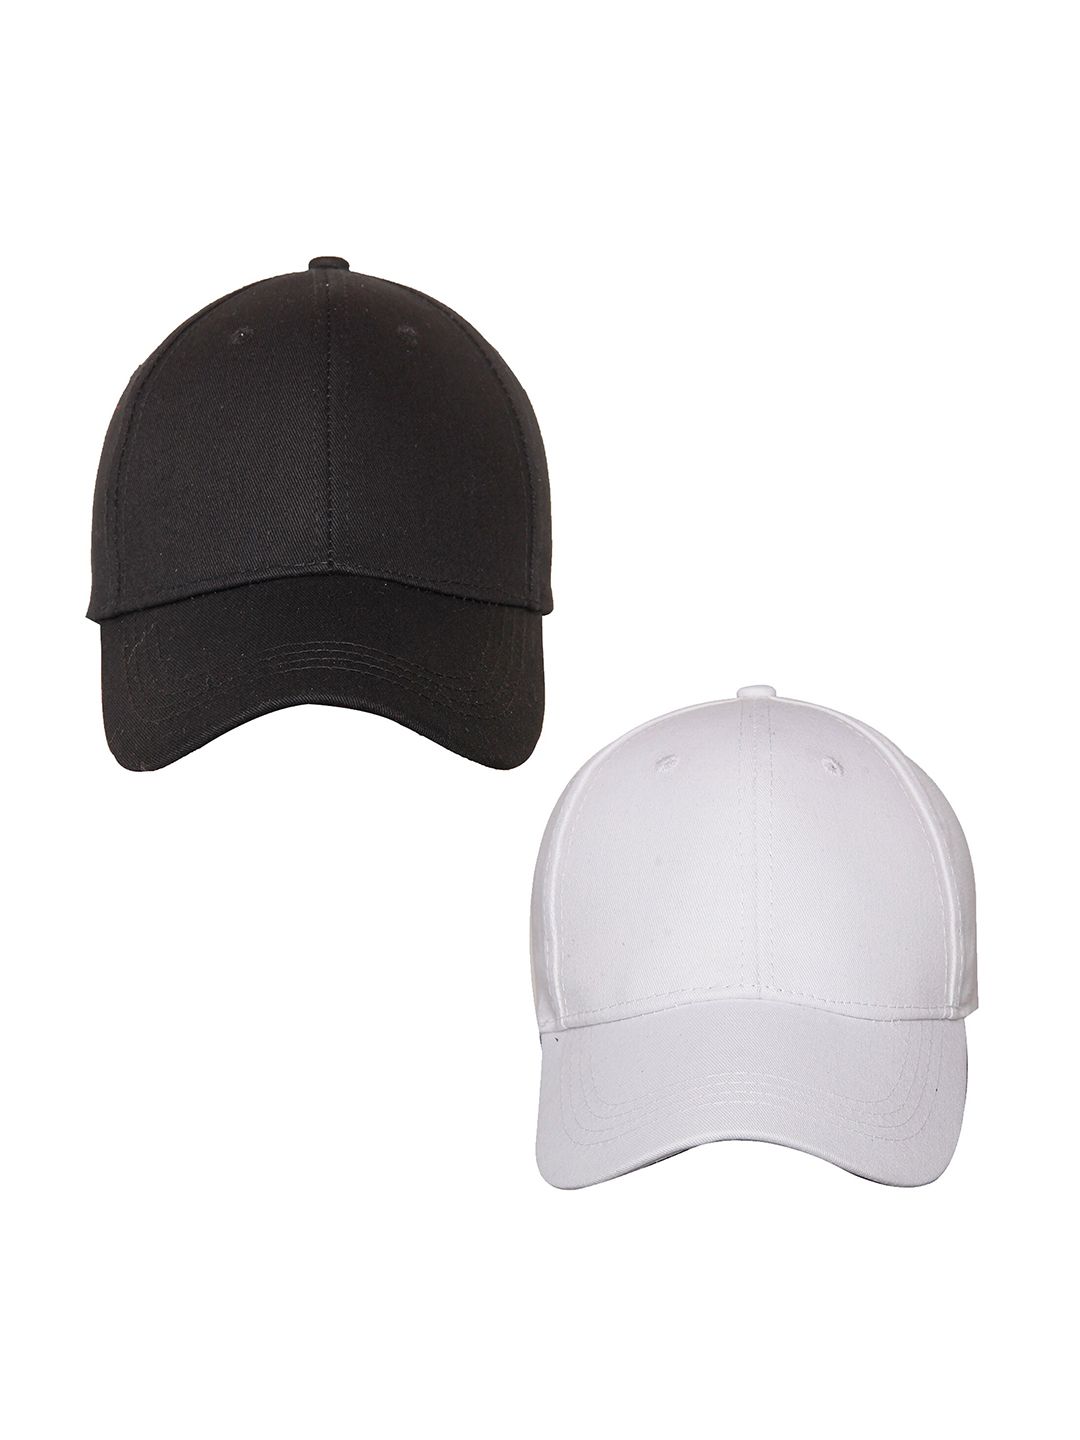 FabSeasons Pack of 2 Unisex White & Black Solid Baseball Cap with Adjustable Buckle Price in India